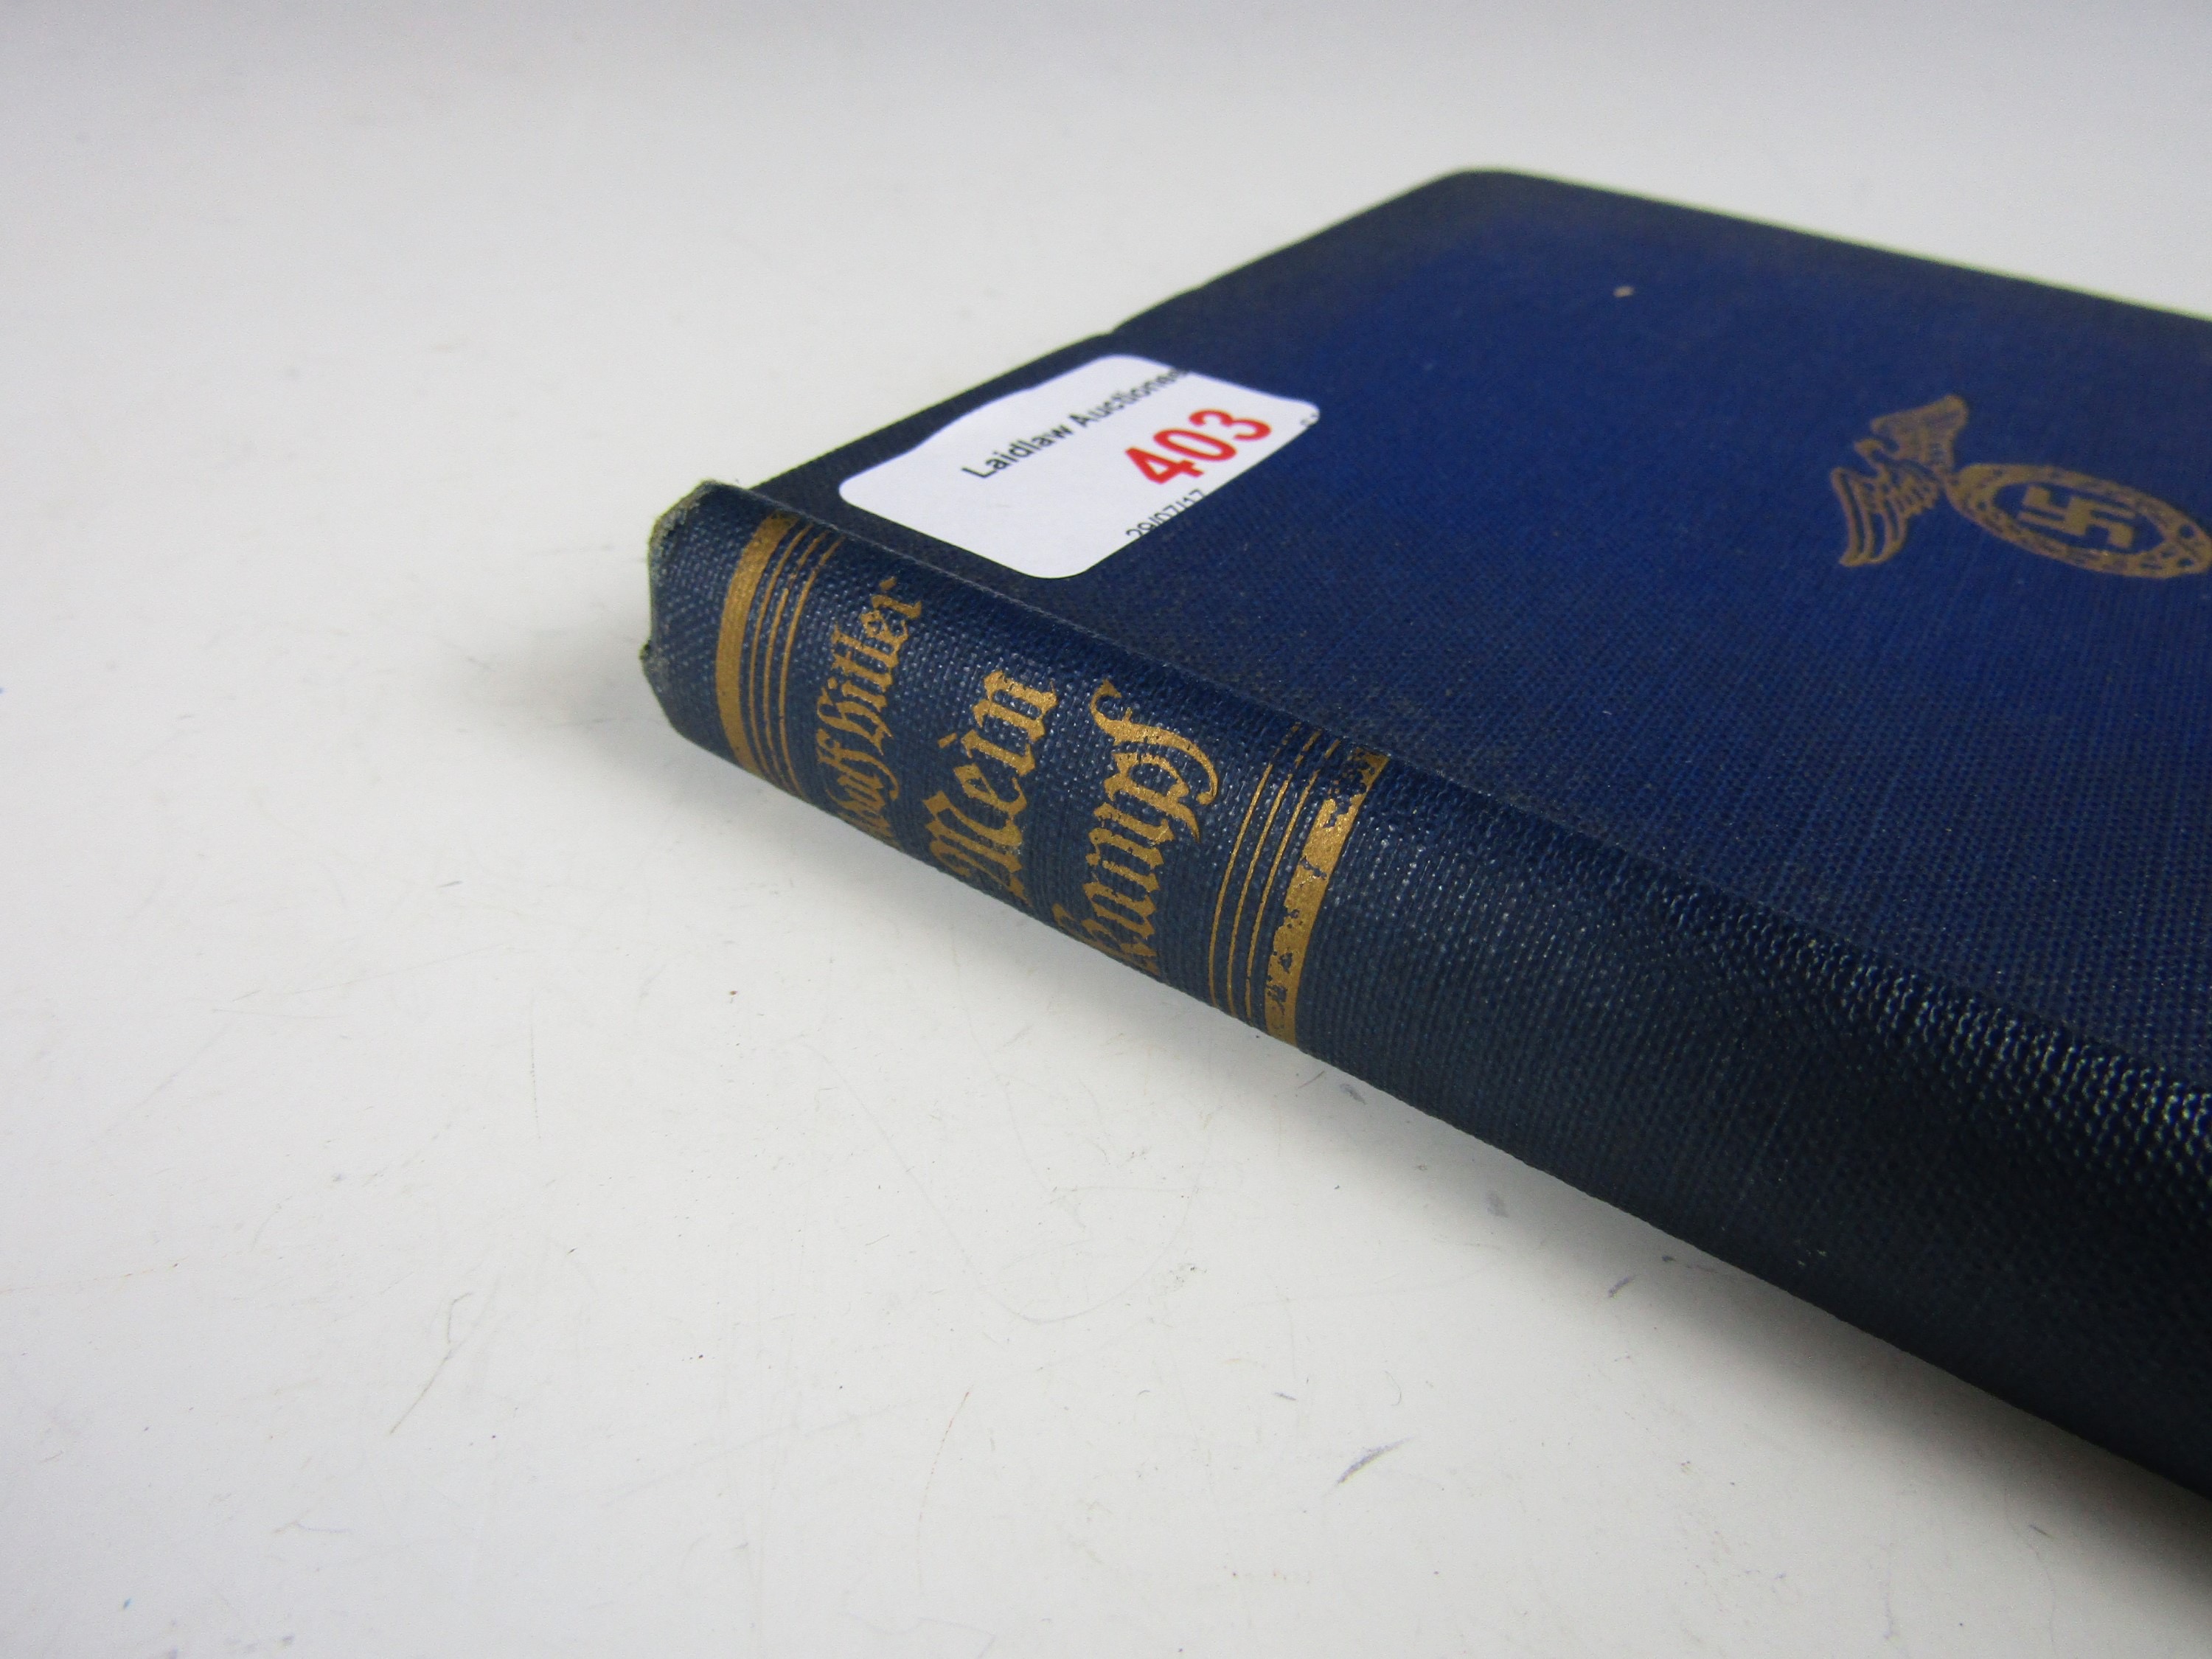 A 1942 English edition of Hitler's Mein Kampf - Image 3 of 3